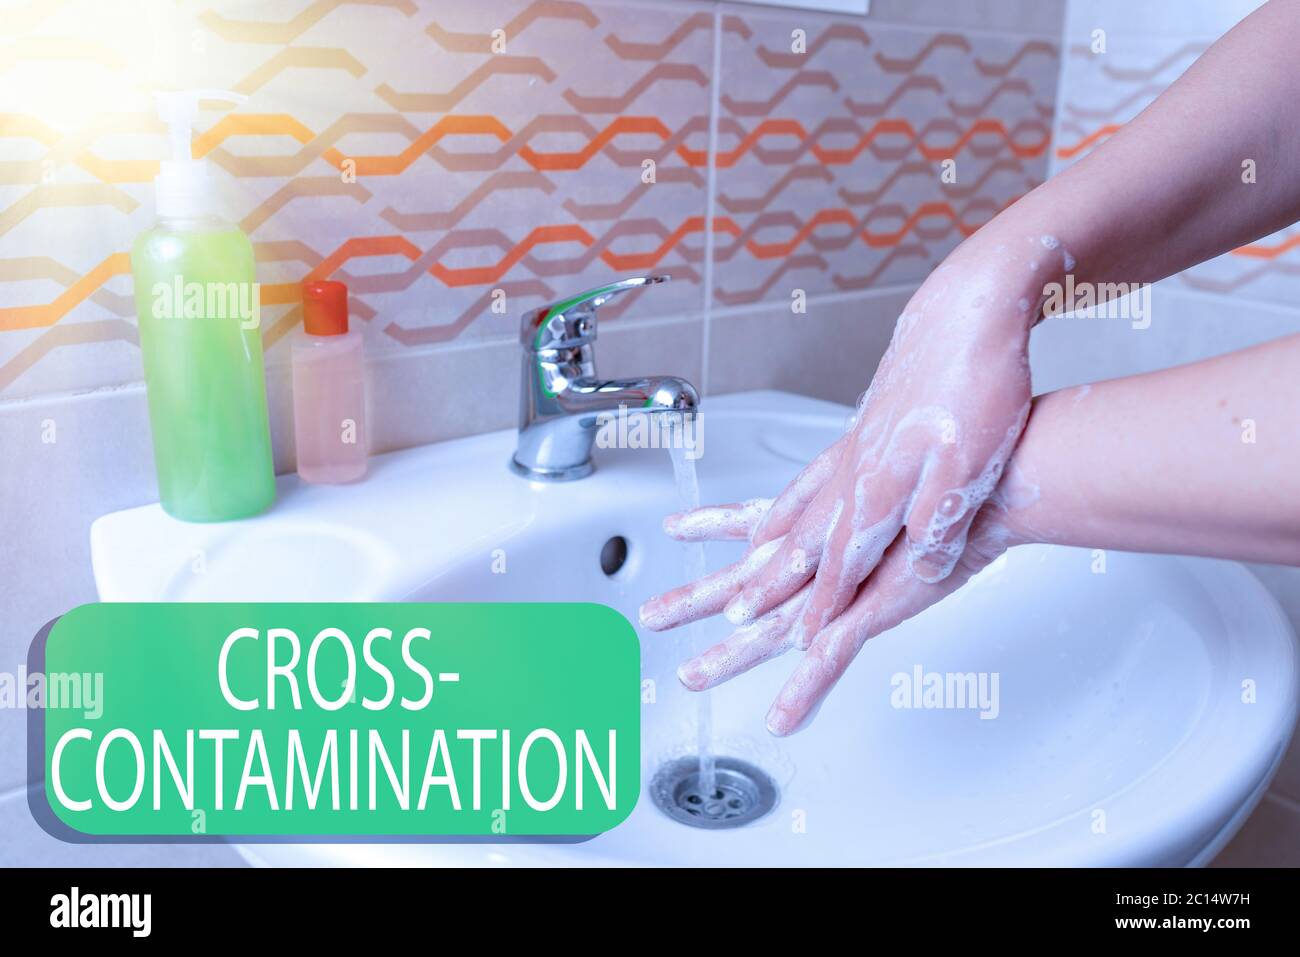 Writing note showing Cross Contamination. Business concept for Unintentional transmission of bacteria from one substance to another Handwashing proced Stock Photo